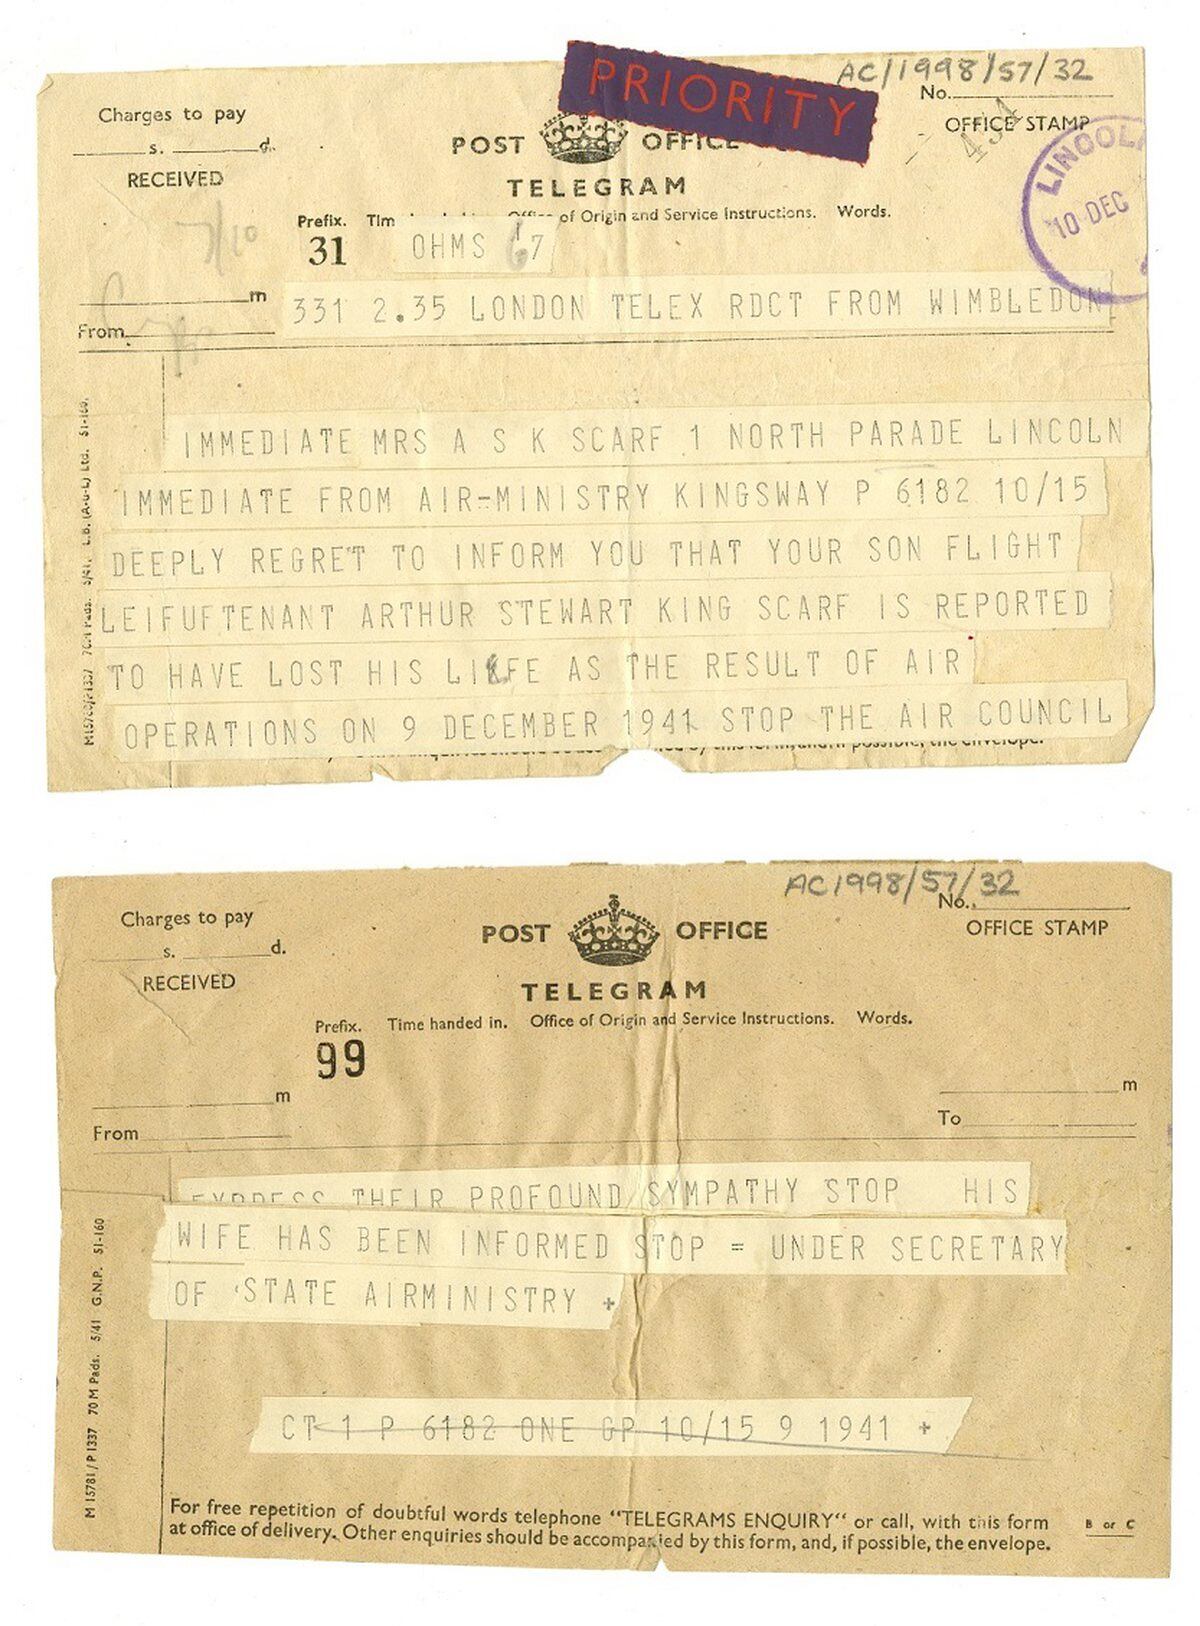 A telegram informing Scarf's family about his death